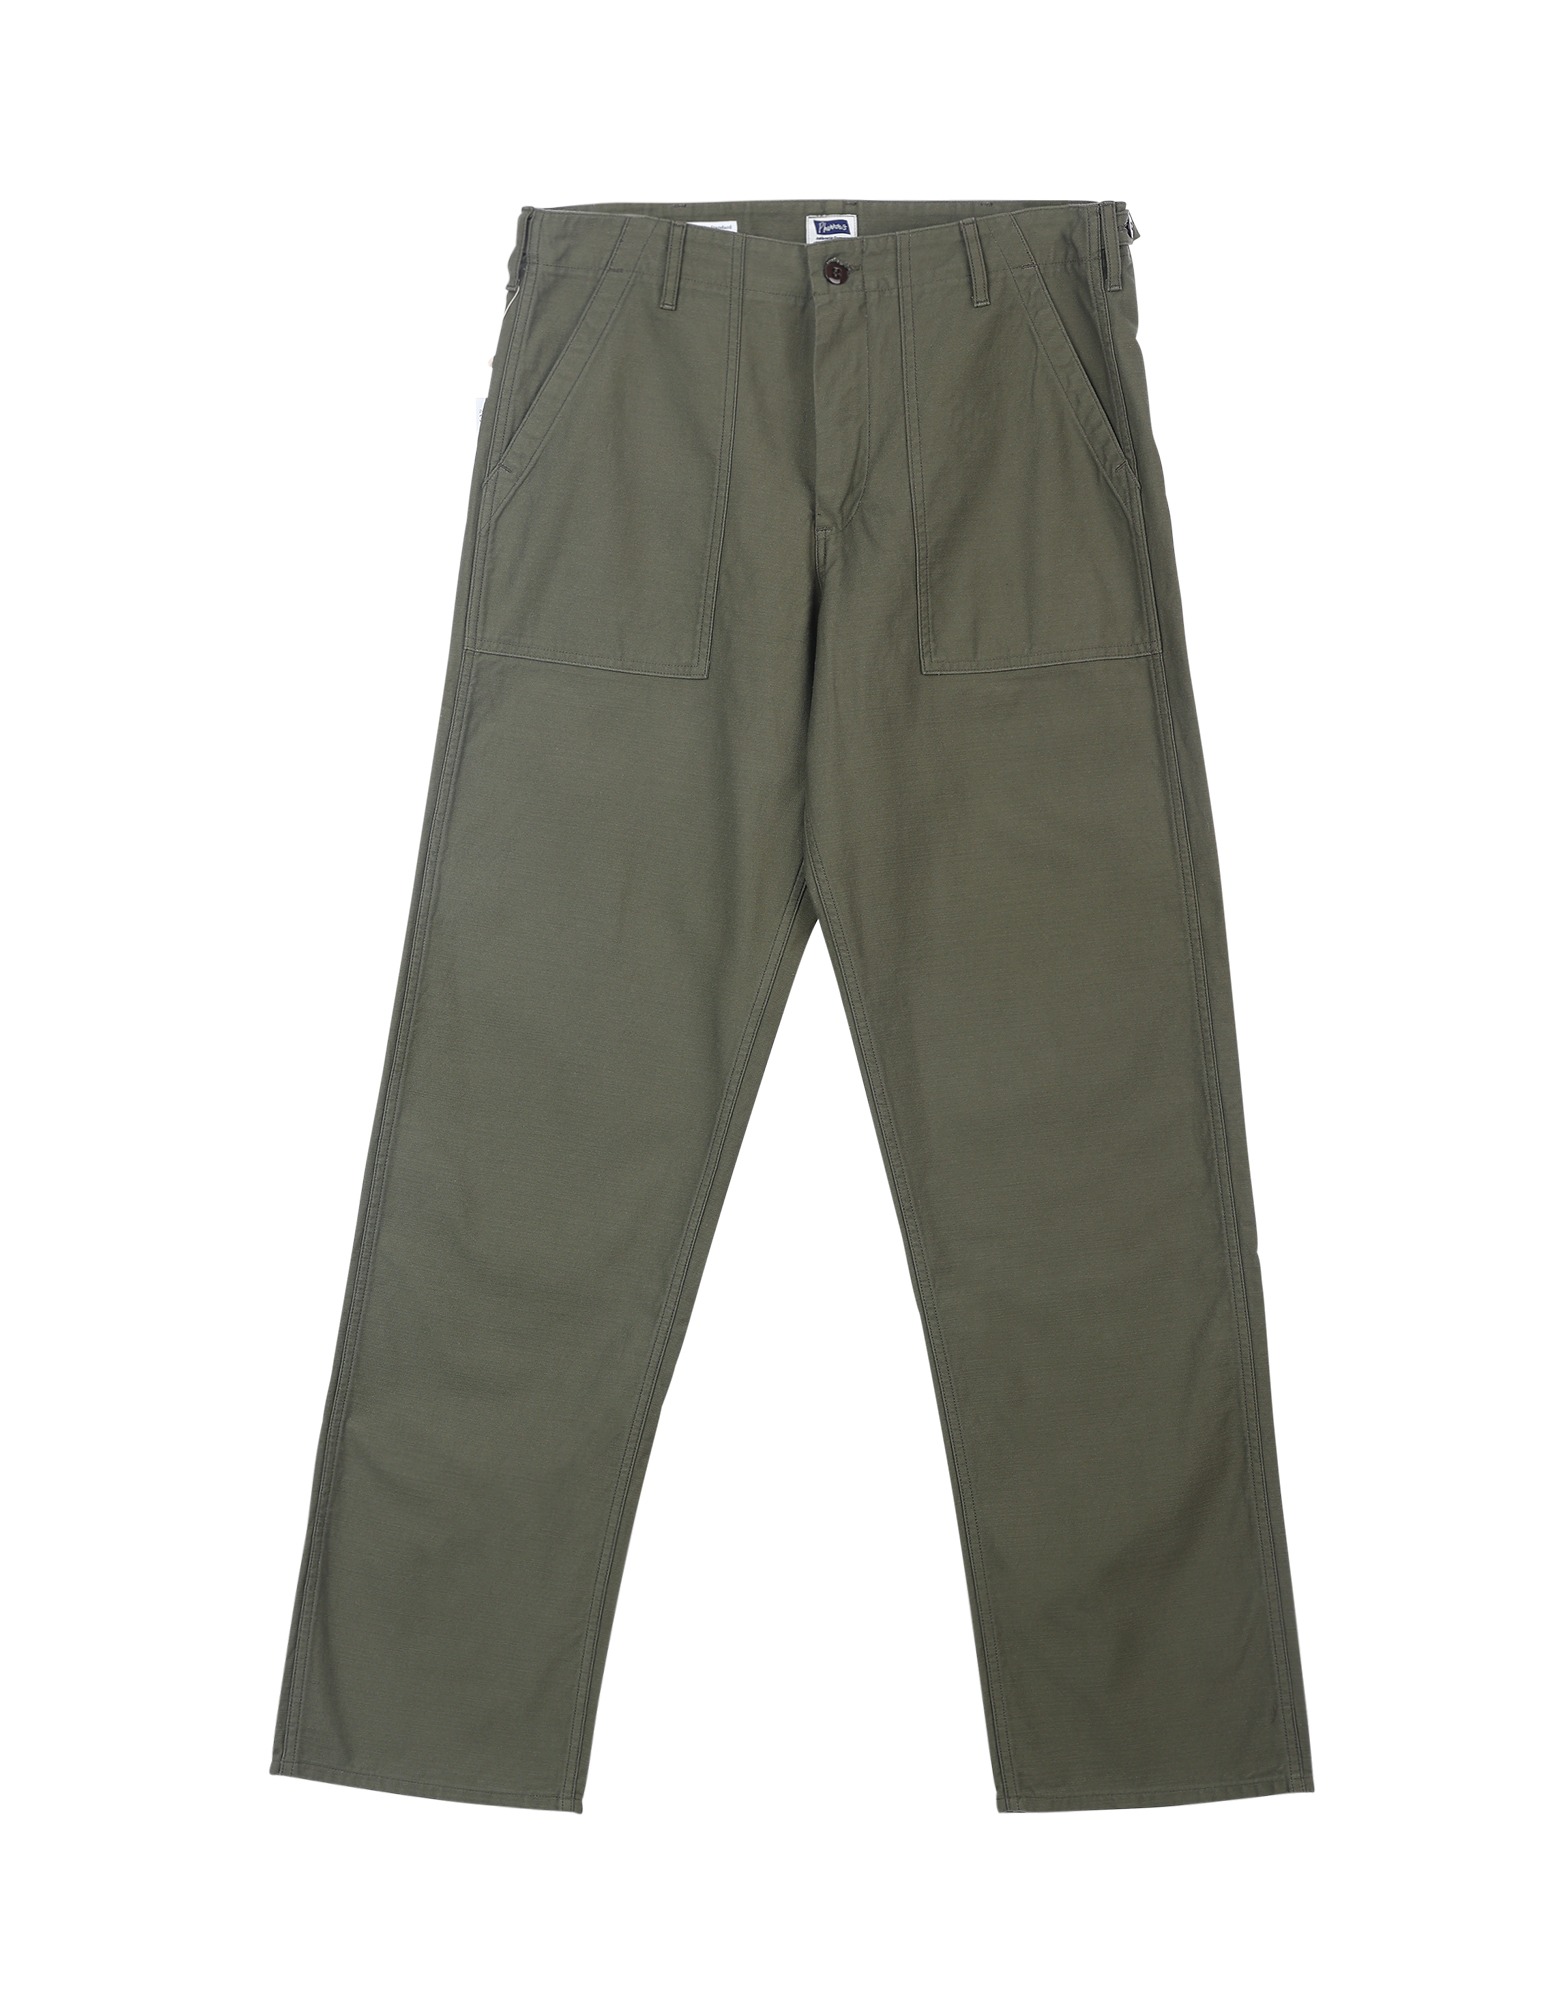 24S-PUP1 Relax Fit Fatigue Utility Pants (Olive)